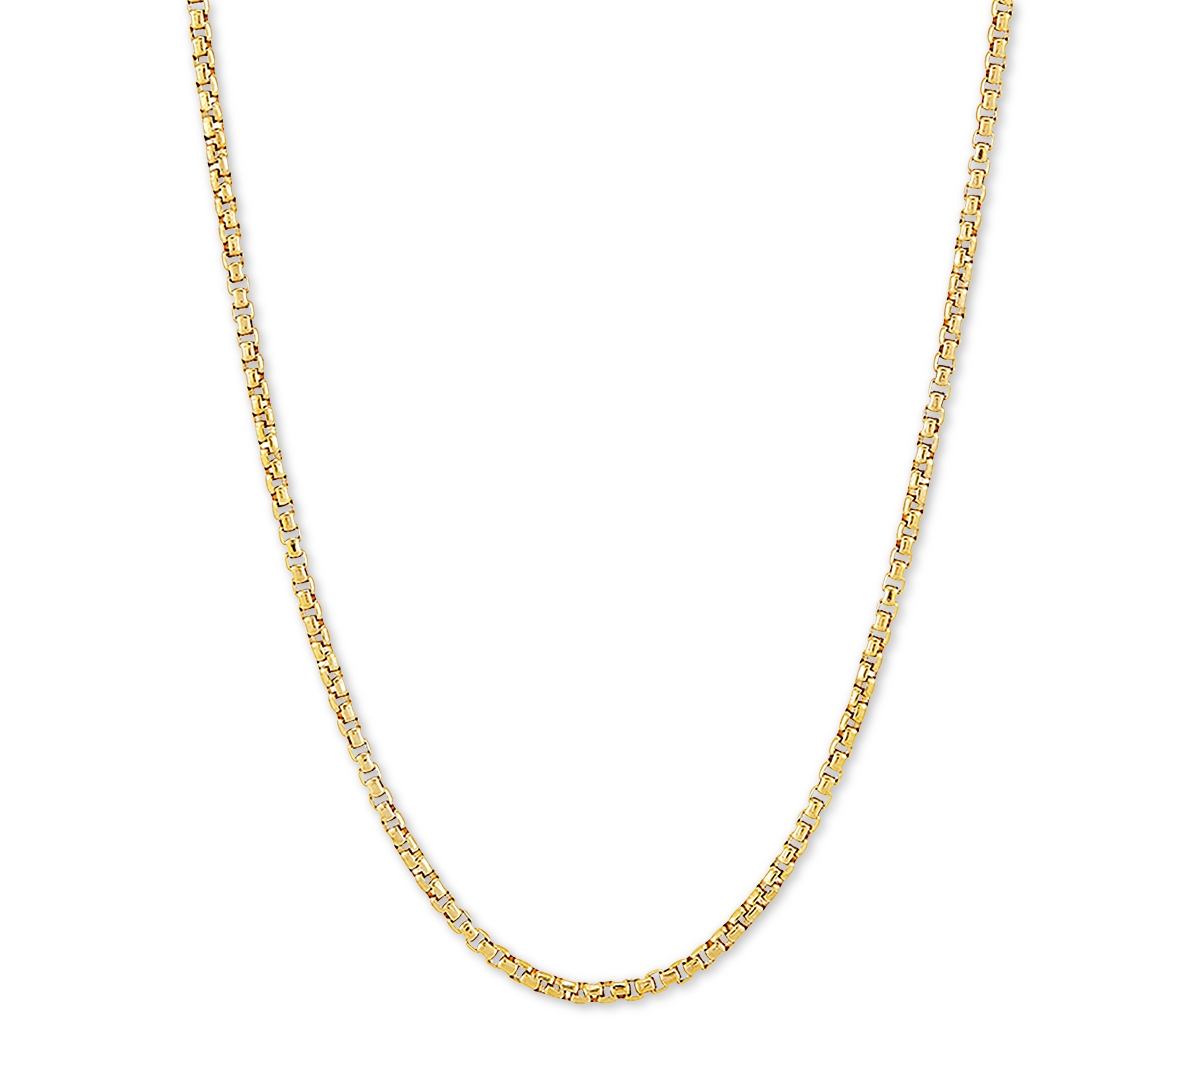 Rounded Box Link 18" Chain Necklace in Sterling Silver or 18k Gold-Plated Over Sterling Silver - Gold Over Silver